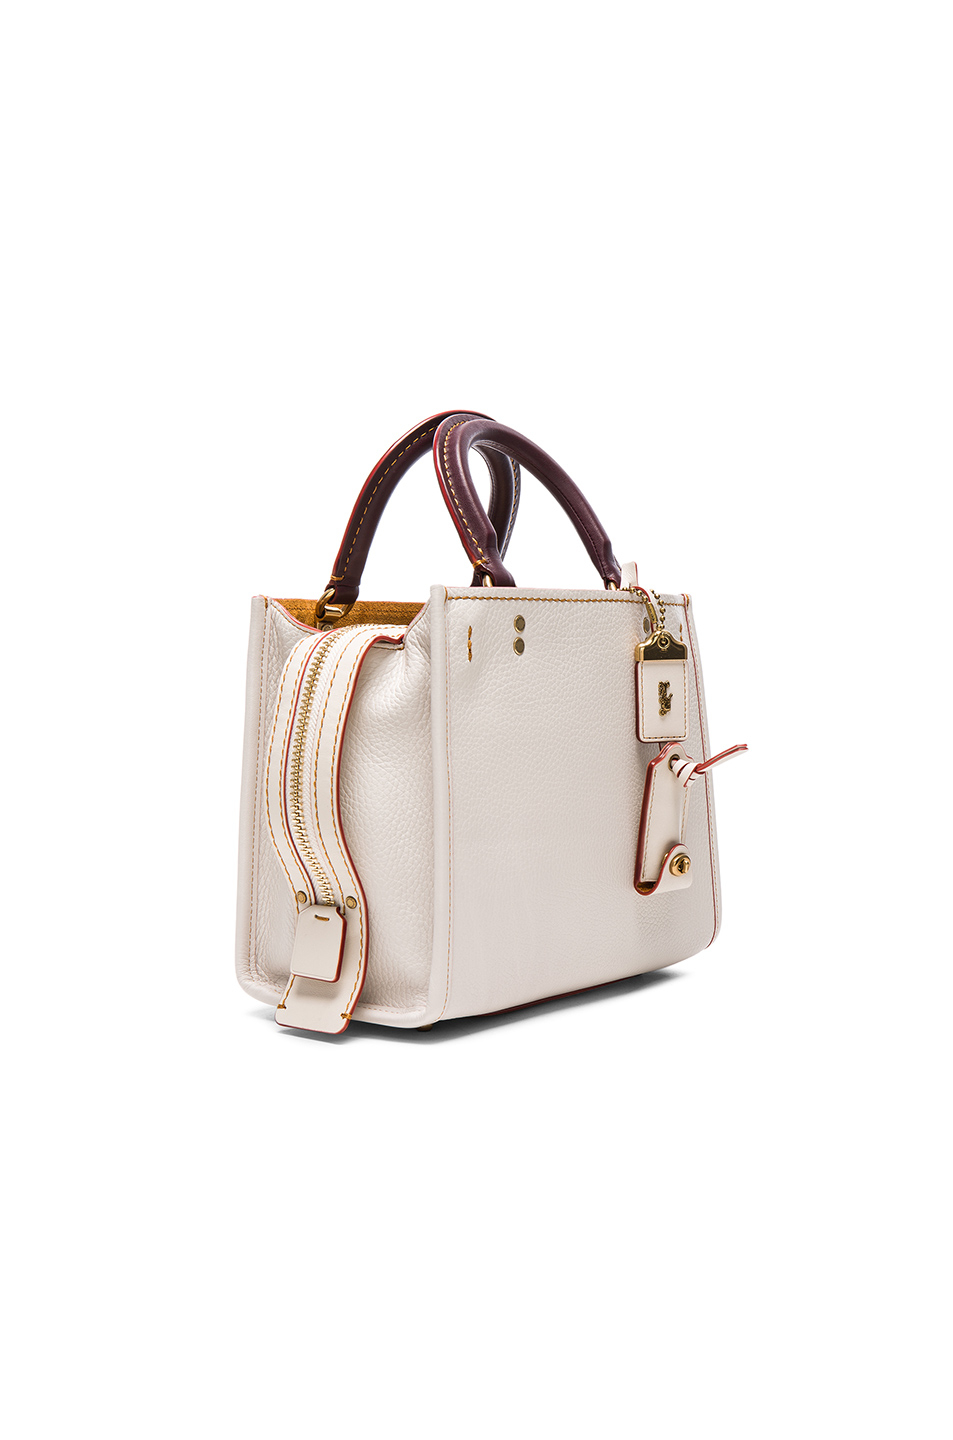 Lyst - Coach Rogue 25 Bag in White